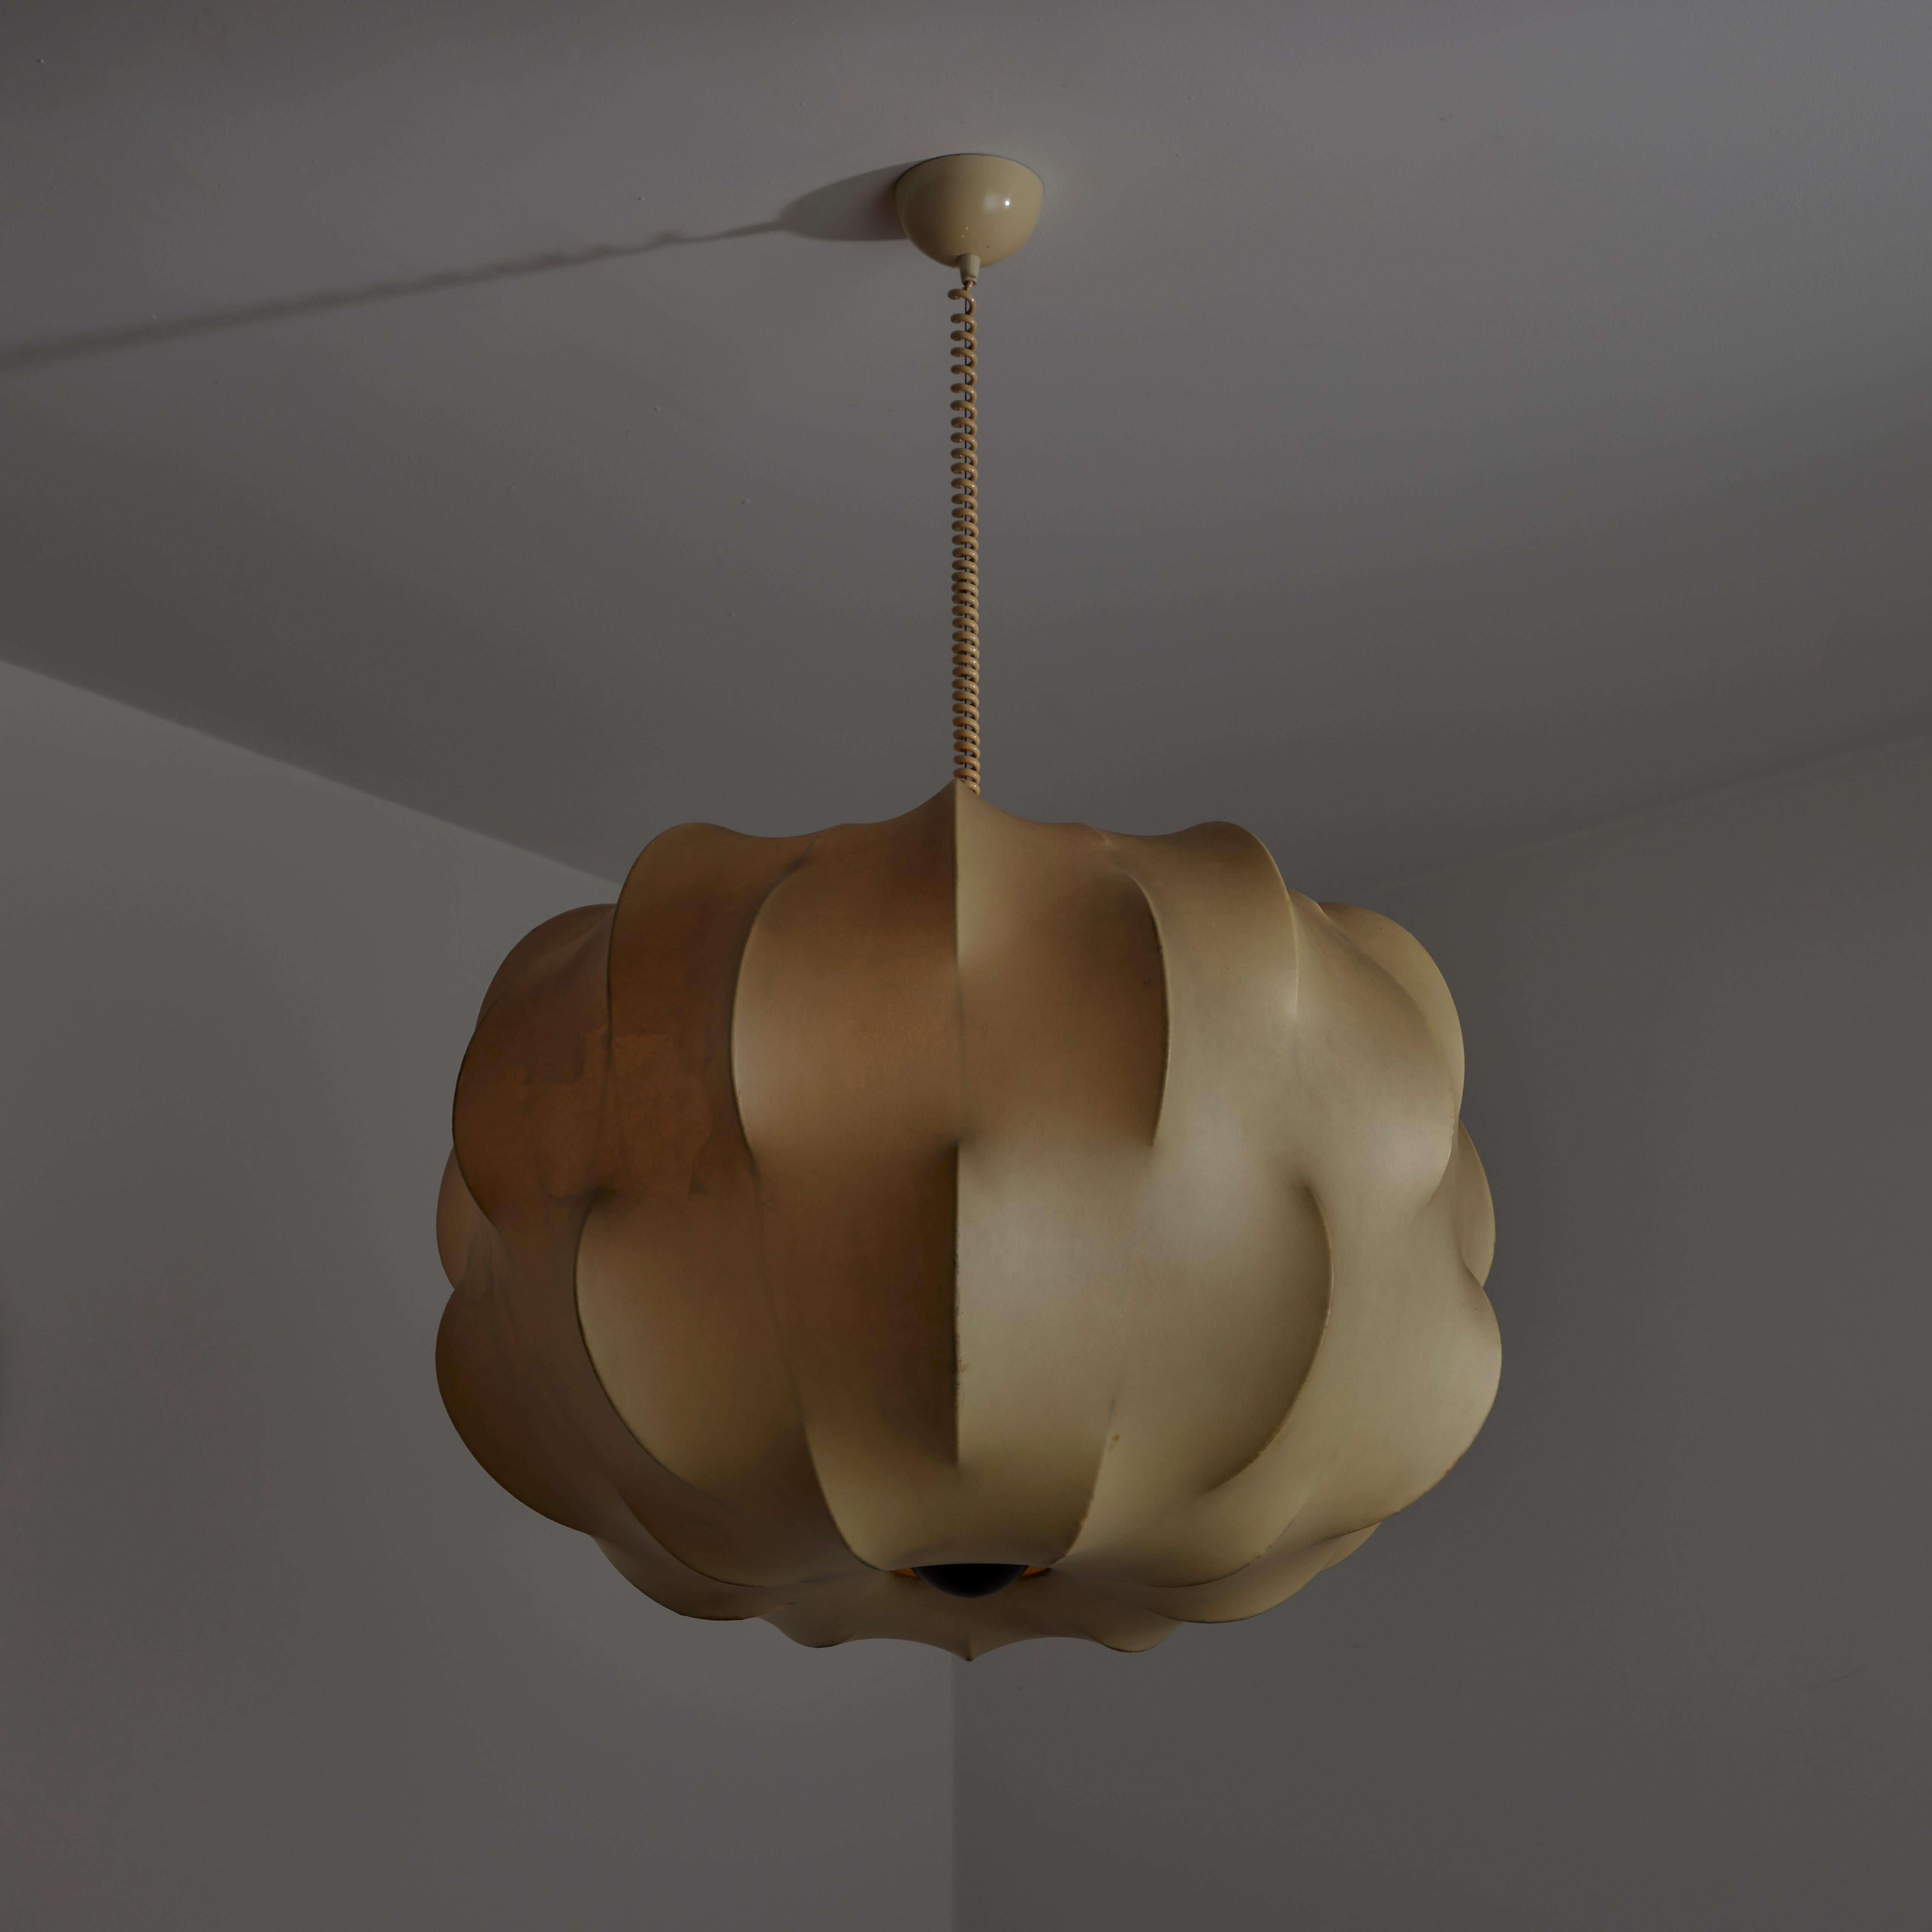 Spun Rare 'Nuvola' Suspension Light by Tobia Scarpa for Flos For Sale